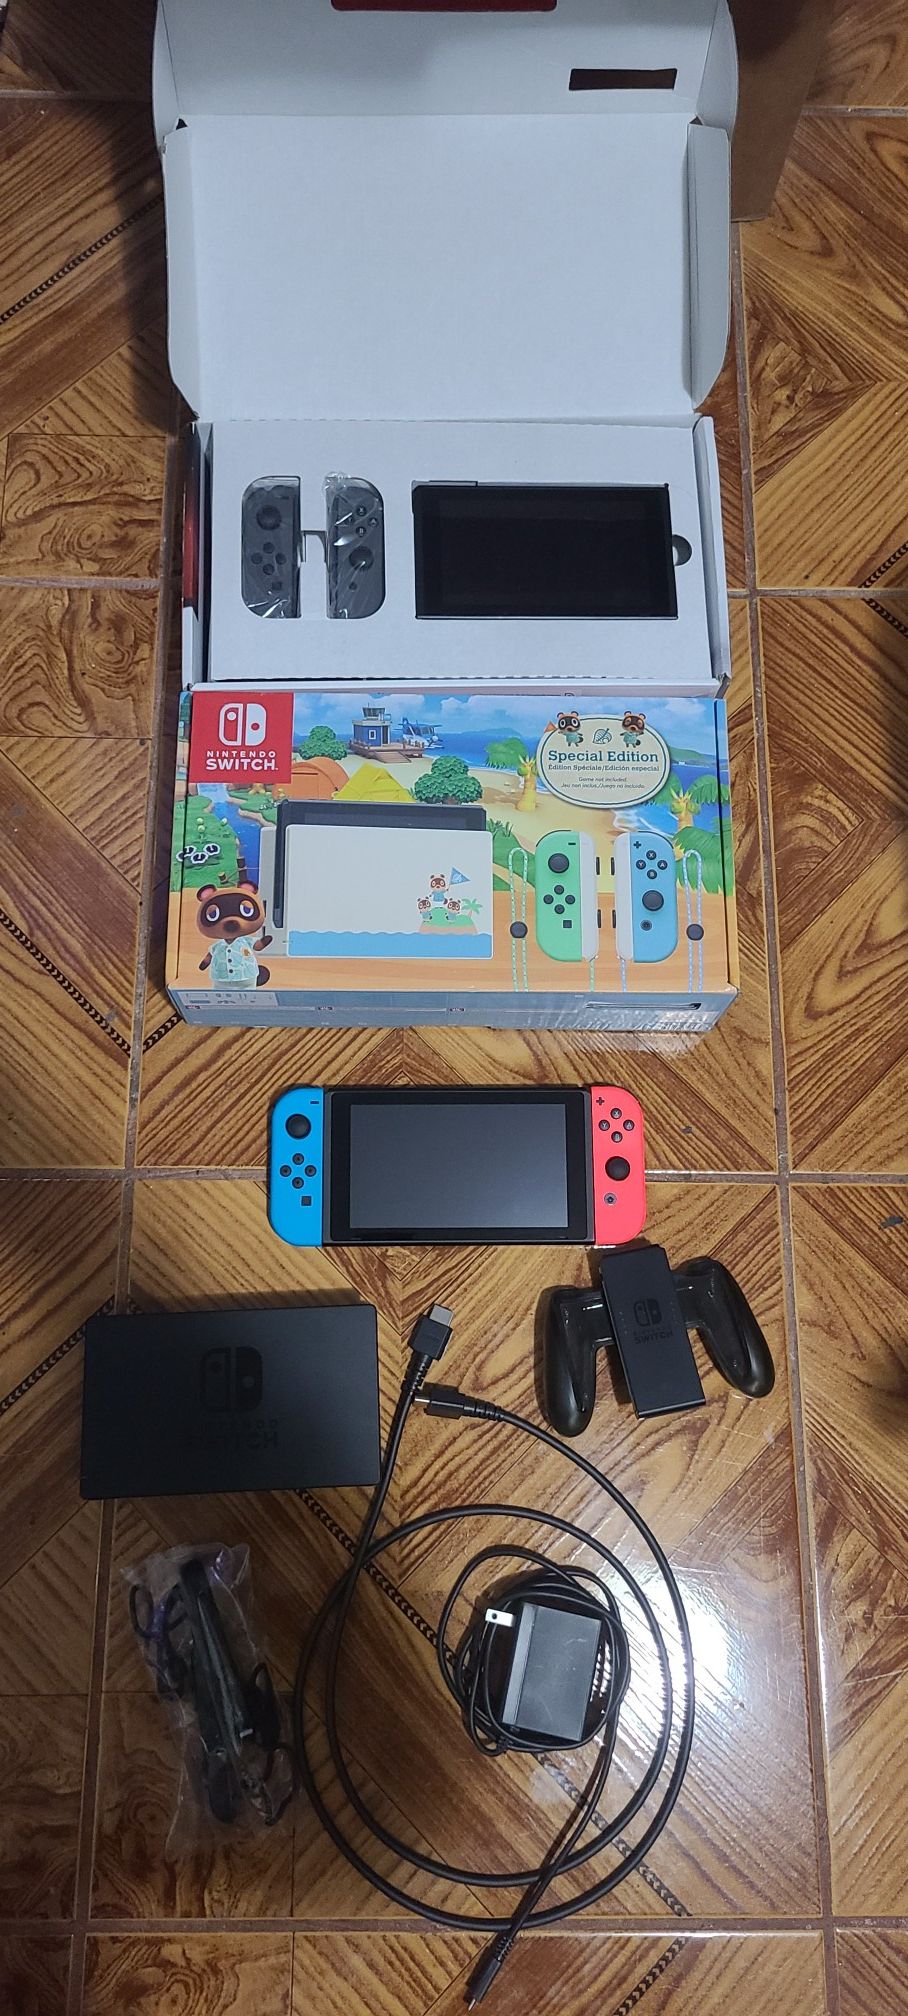 Nintendo switch new and used see below for details